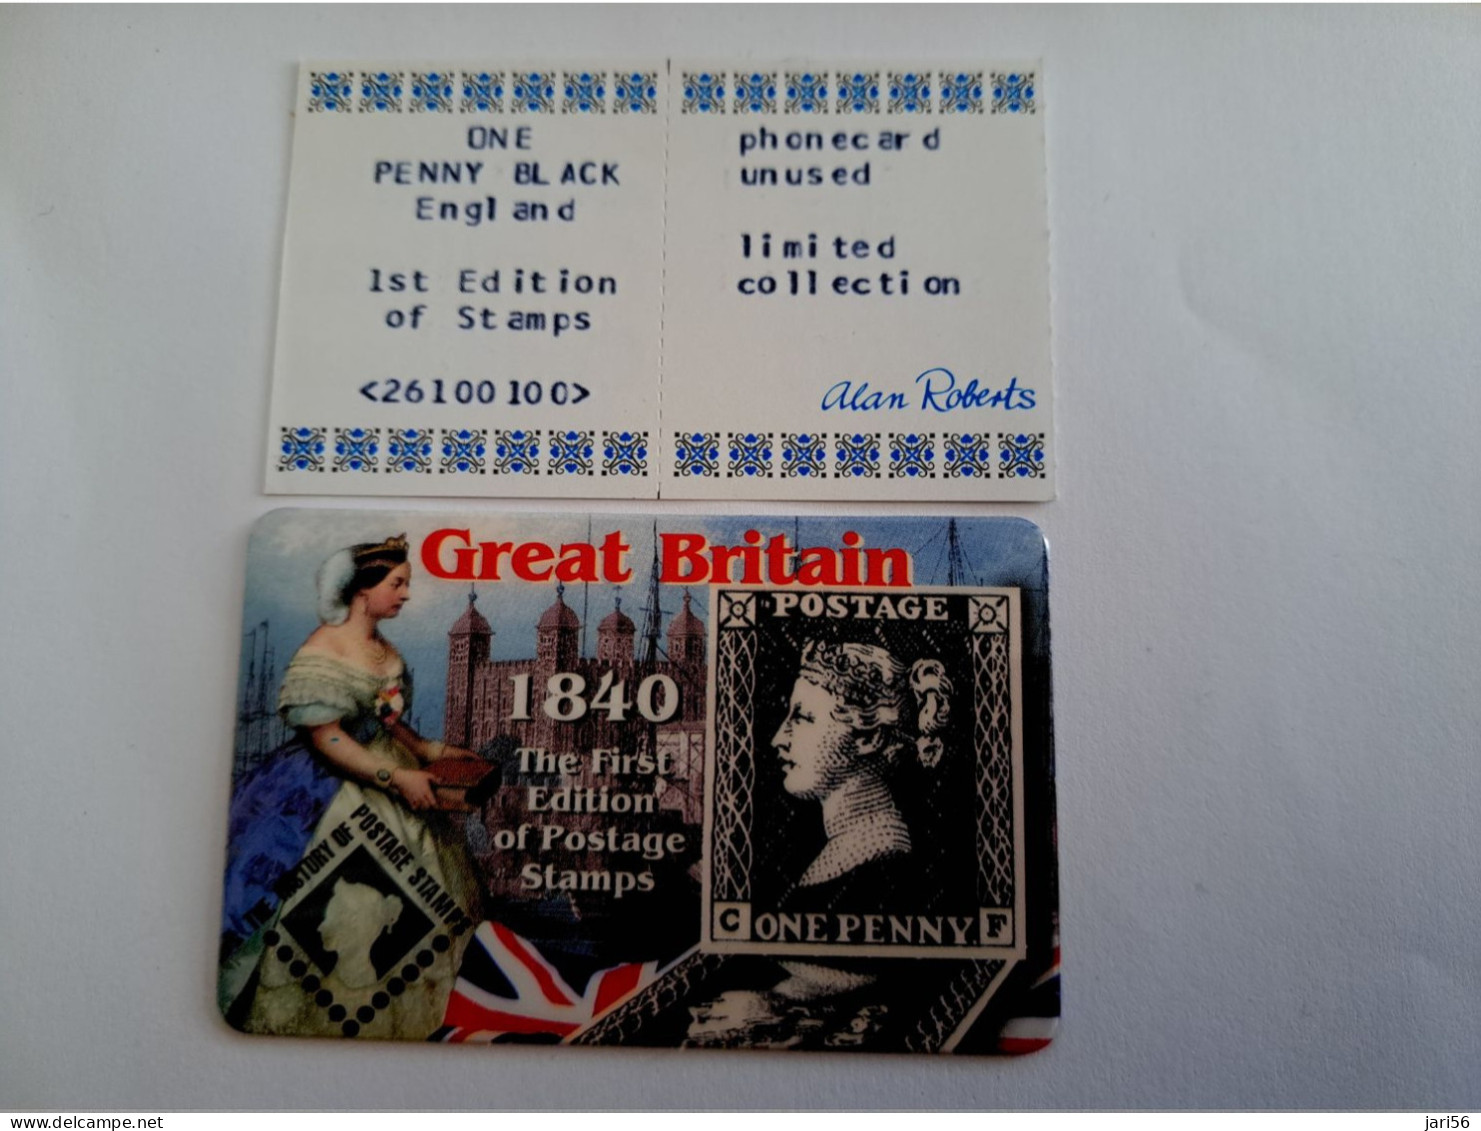 GREAT BRITAIN /20 UNITS / PENNY BLACK  1840 / DATE 06/2002     /    PREPAID CARD / LIMITED EDITION/ MINT  **15703** - [10] Collections